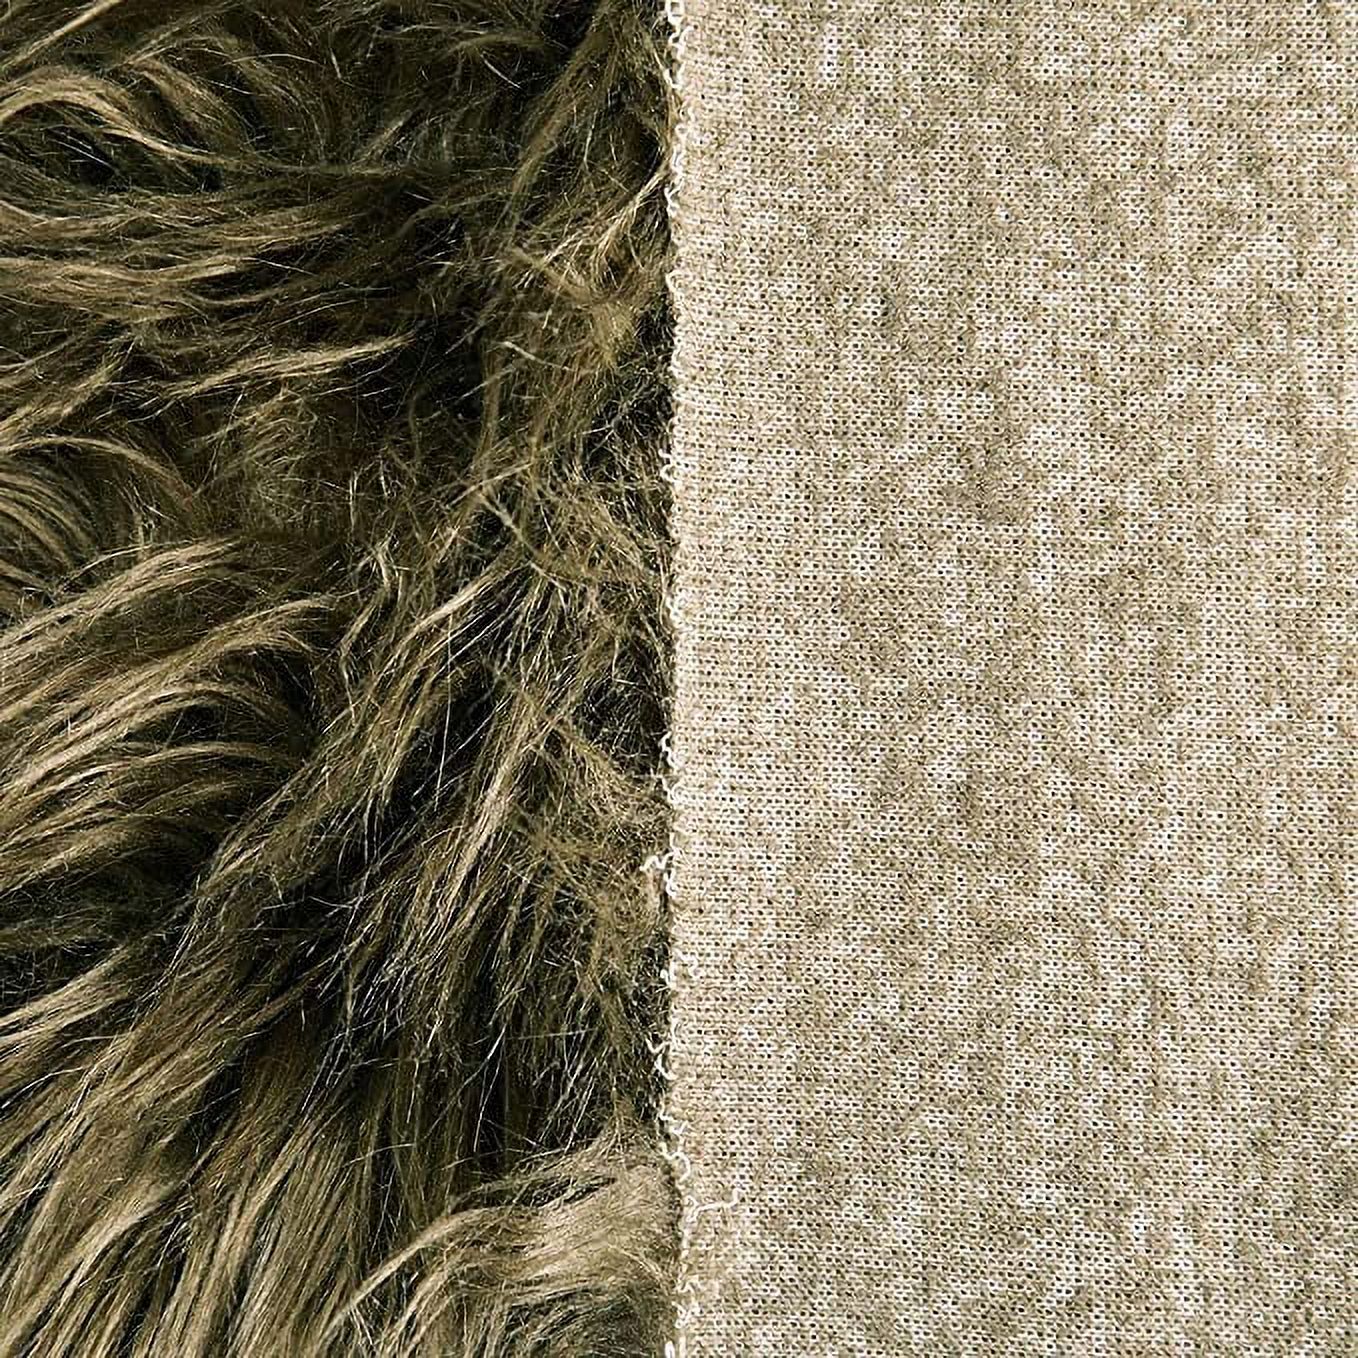 FabricLA Shaggy Faux Fur Fabric by The Yard - 72 x 60 Inches (180 cm x 150 cm) - Craft Furry Fabric for Sewing Apparel, Rugs, Pi